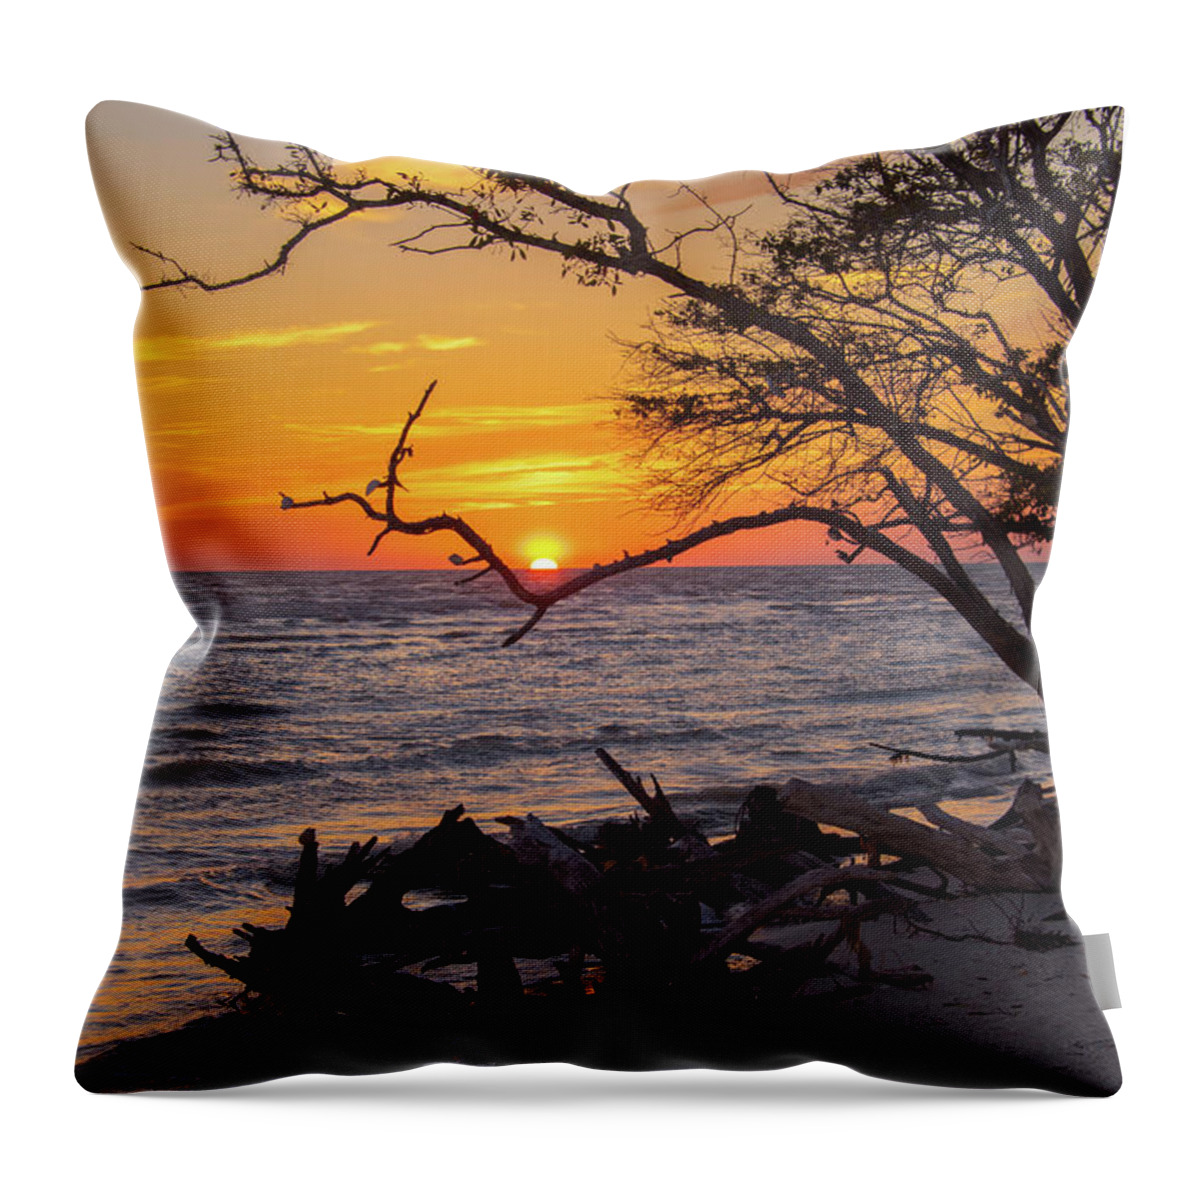 Sunset Throw Pillow featuring the photograph Sunset Cradled by a Tree on Barefoot Beach Florida by Artful Imagery